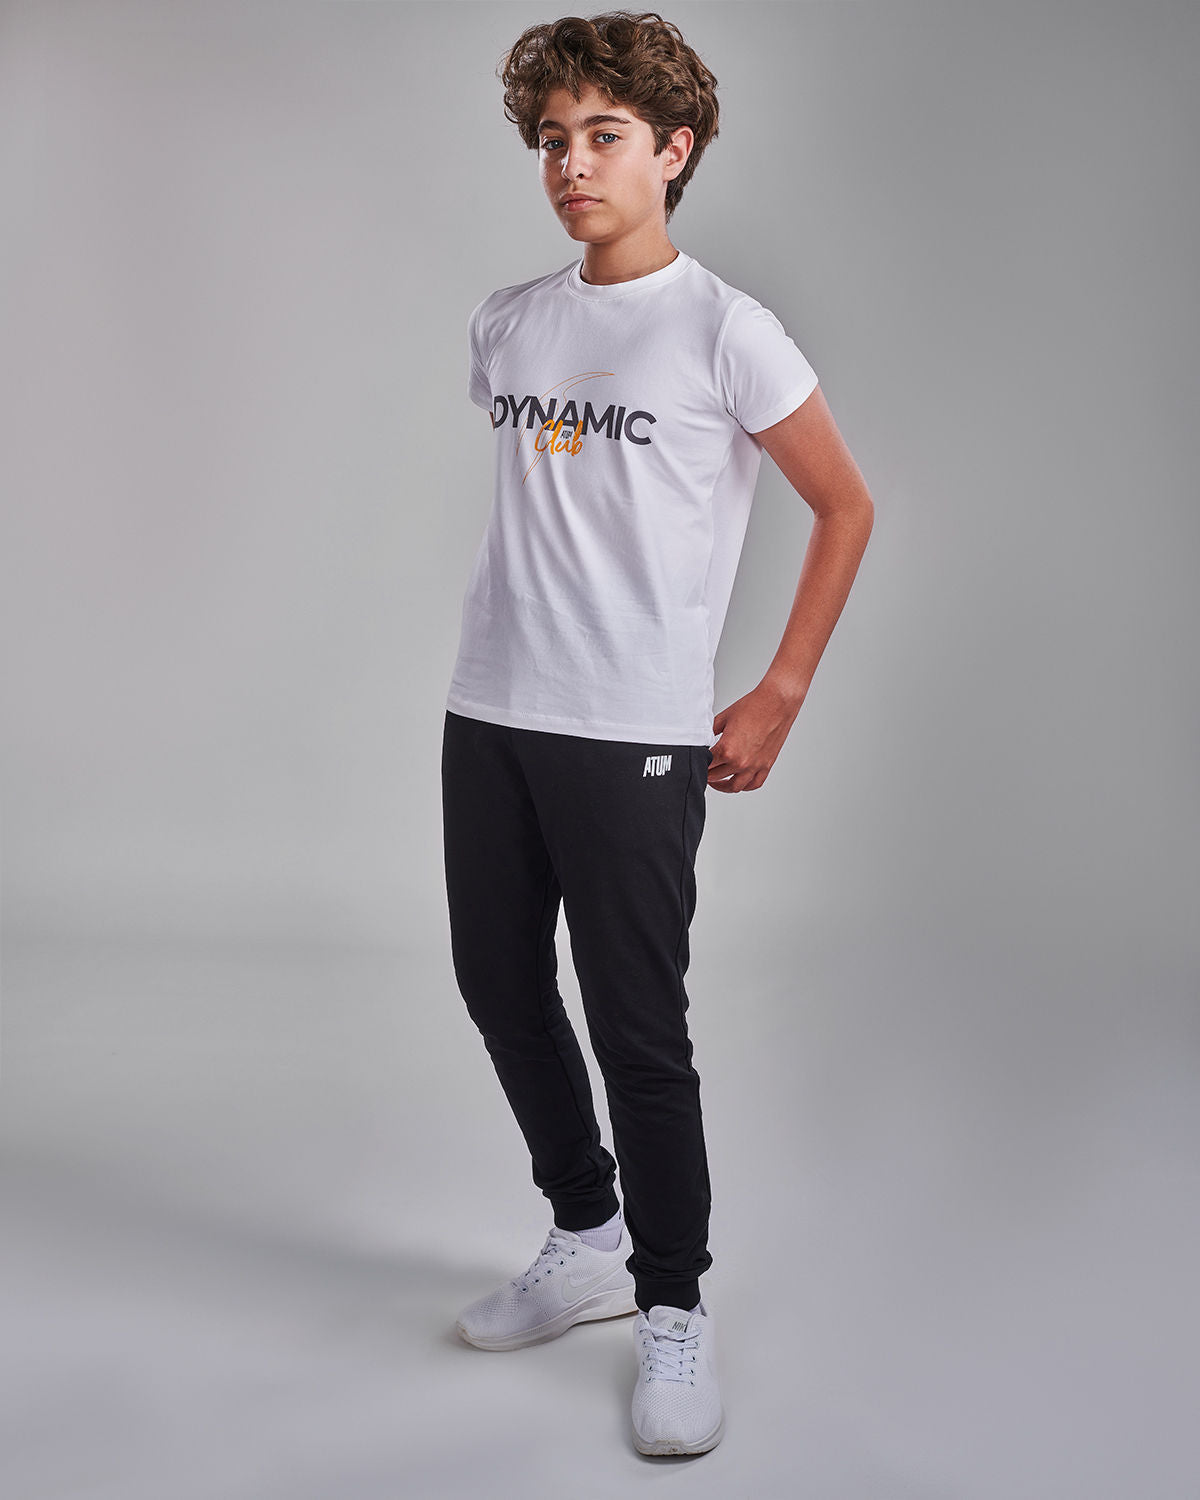 Photo by 𝗔𝗧𝗨𝗠 SPORTSWEAR ® on May 22, 2022. May be an image of 1 boy wears a white t-shirt with a text ''Dynamic club",and a sweatpants.